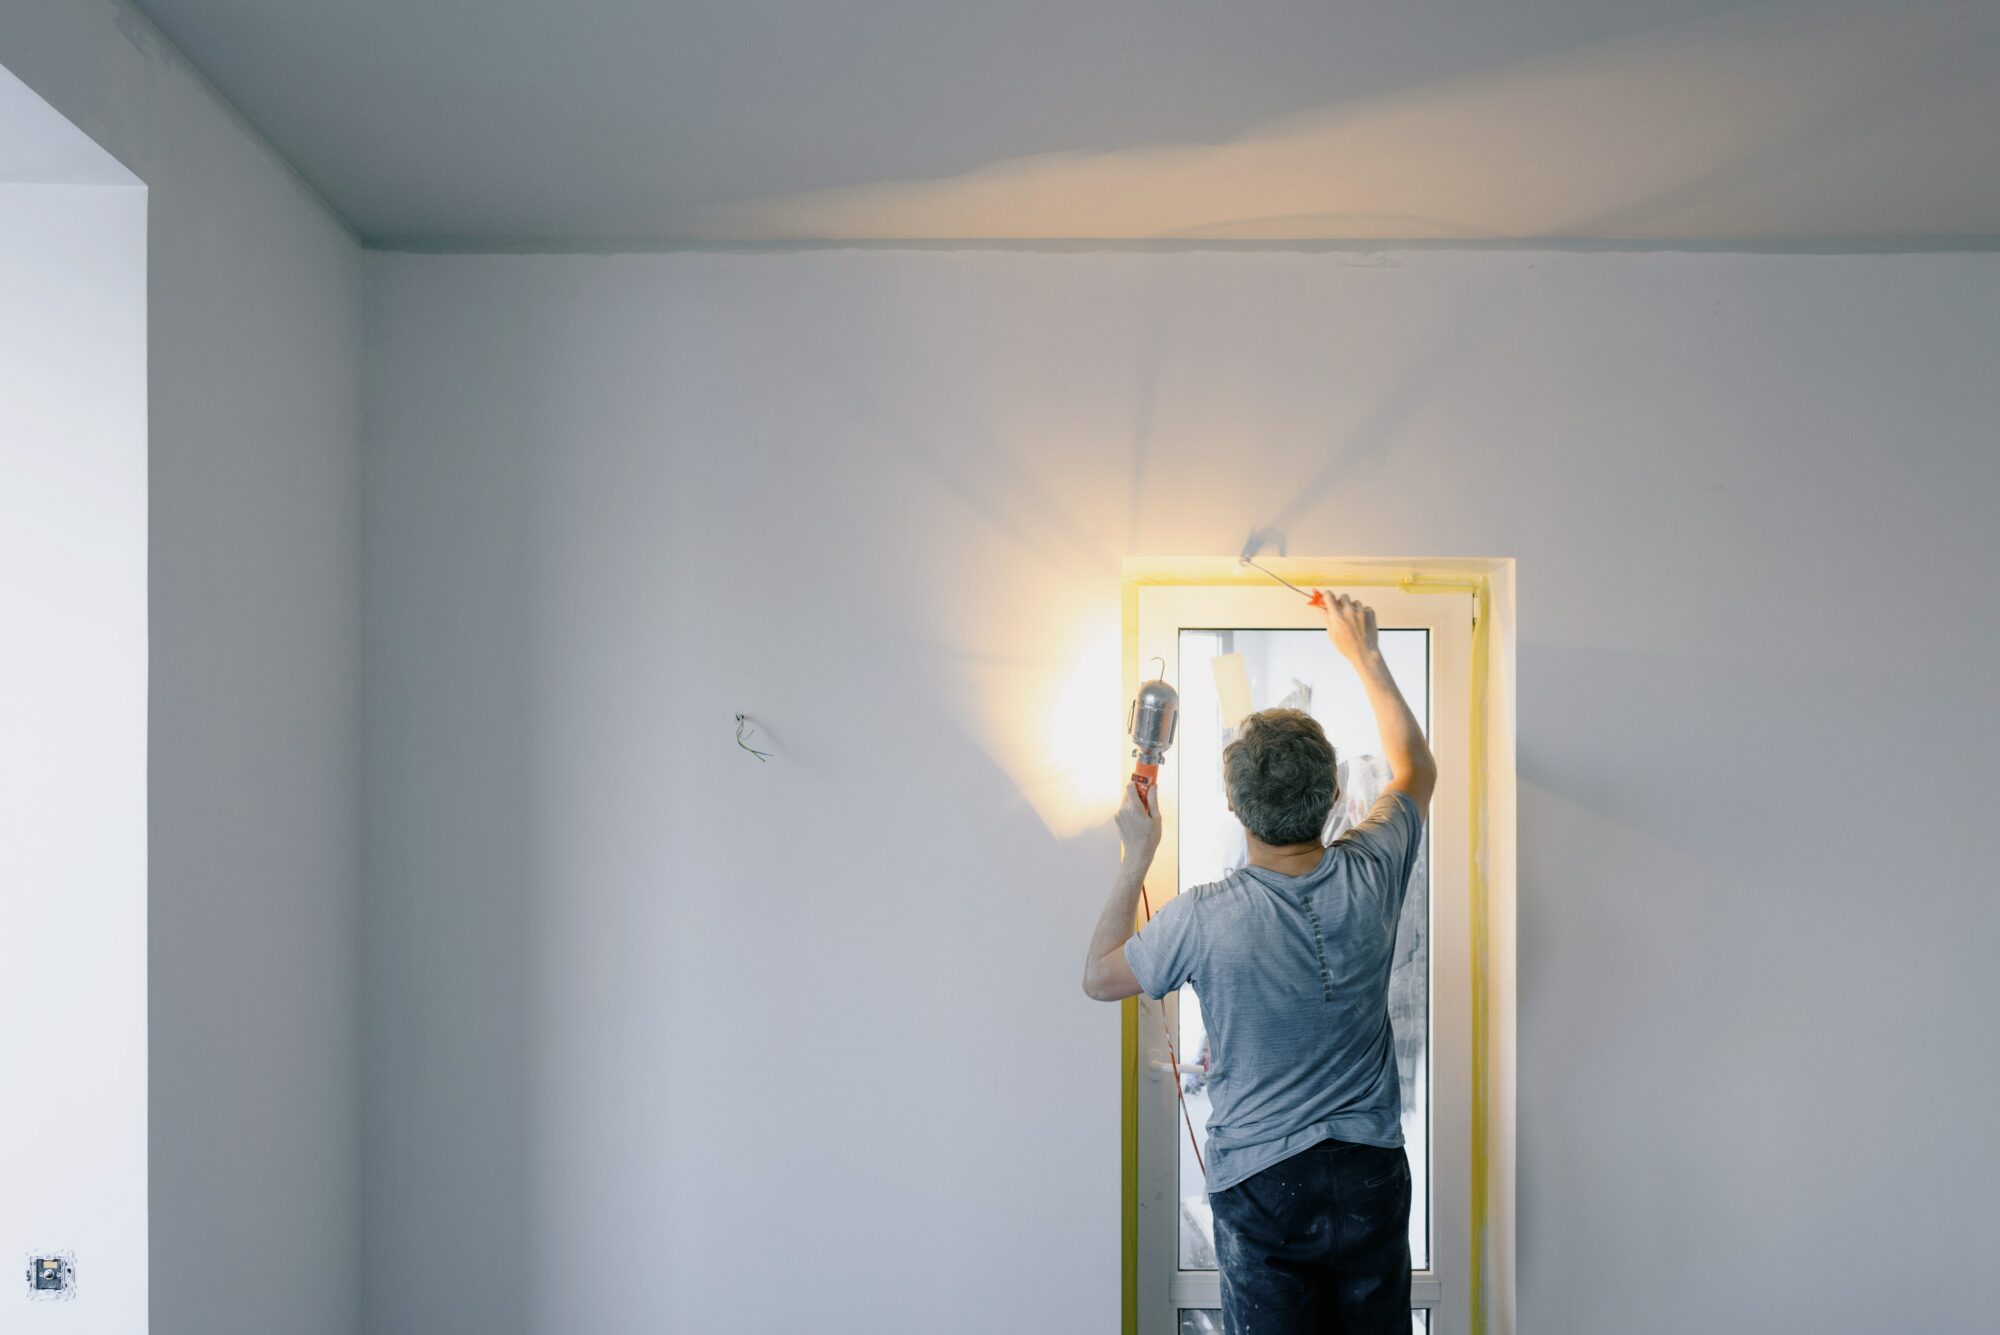 Things you should know before making a home improvement